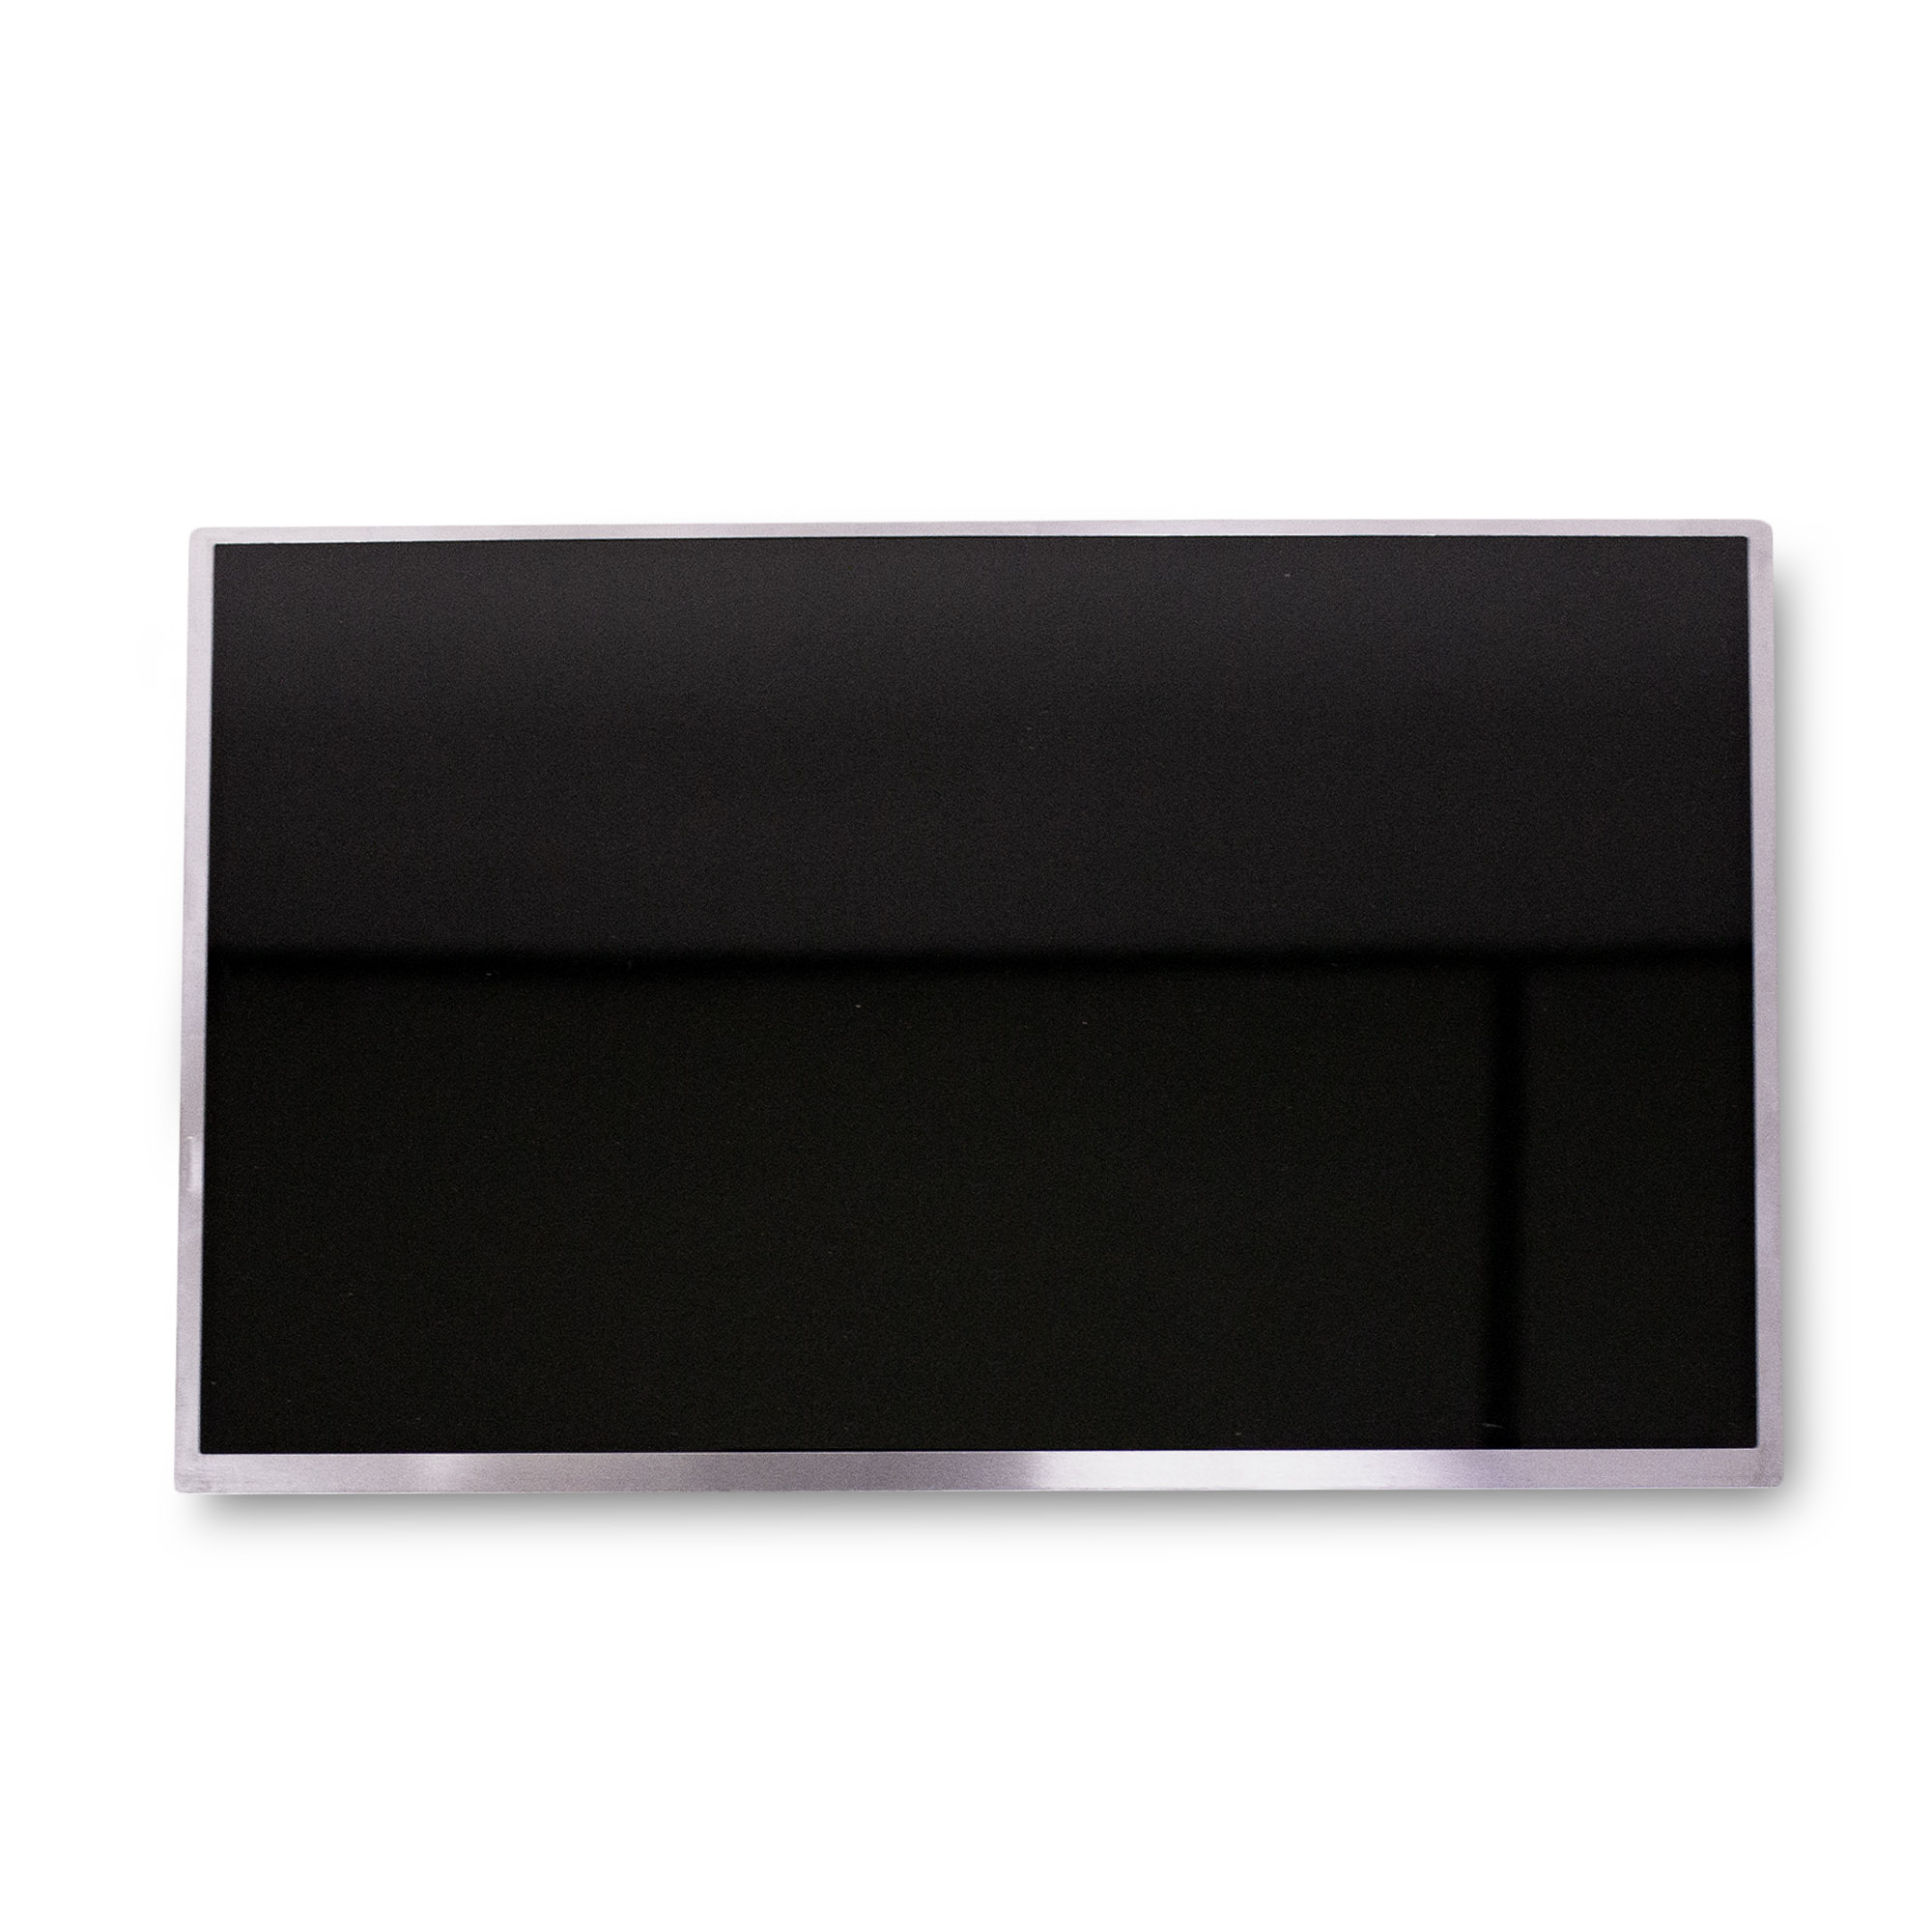 SCREEN 14.1" LCD 50PIN 1440*900 FOR DELL